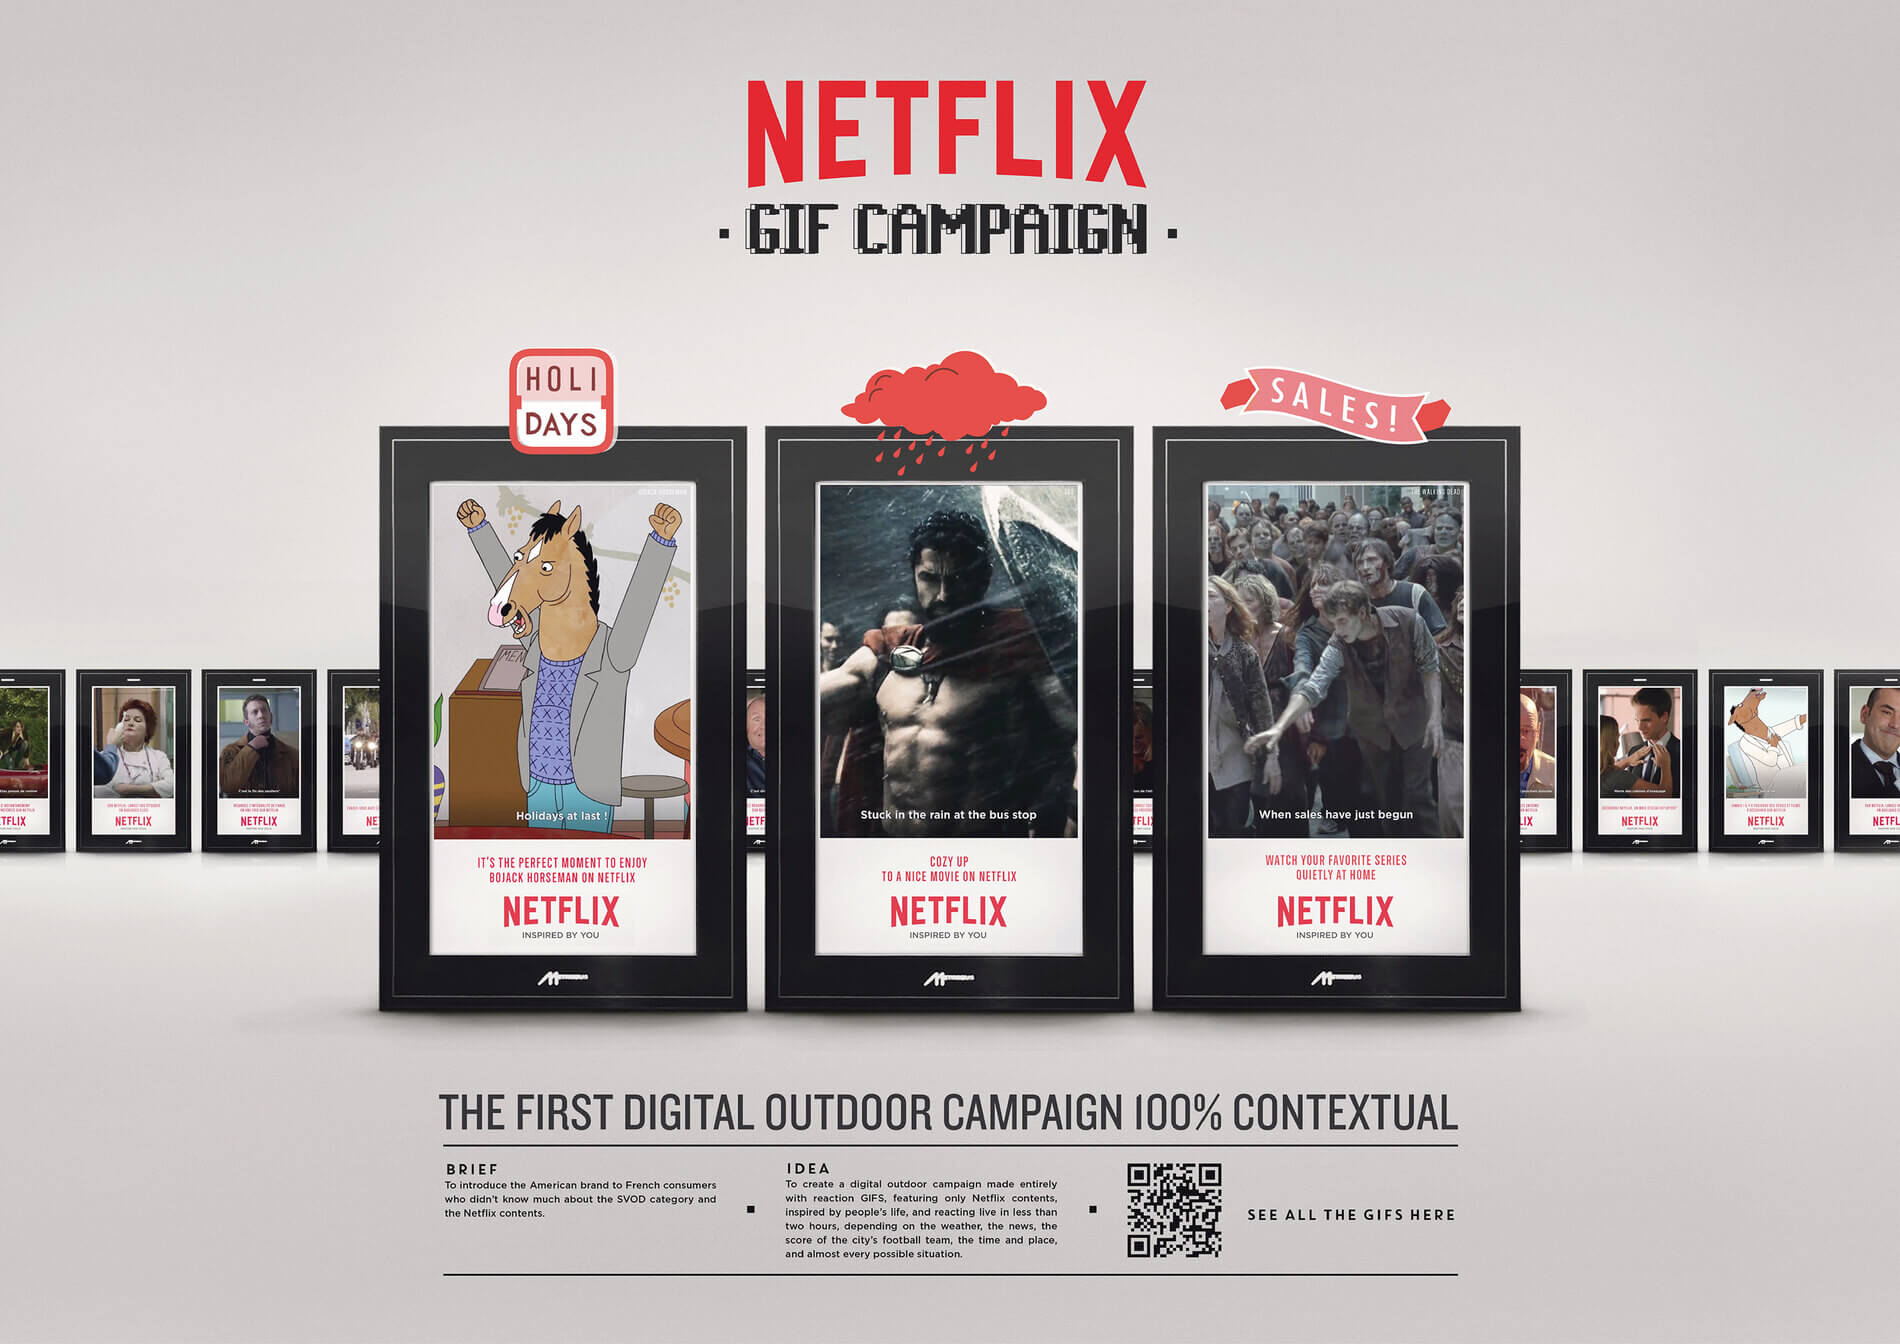 Netflix Gif Campaign Doctors of the World: Make a child cry. Campaigns of the World®